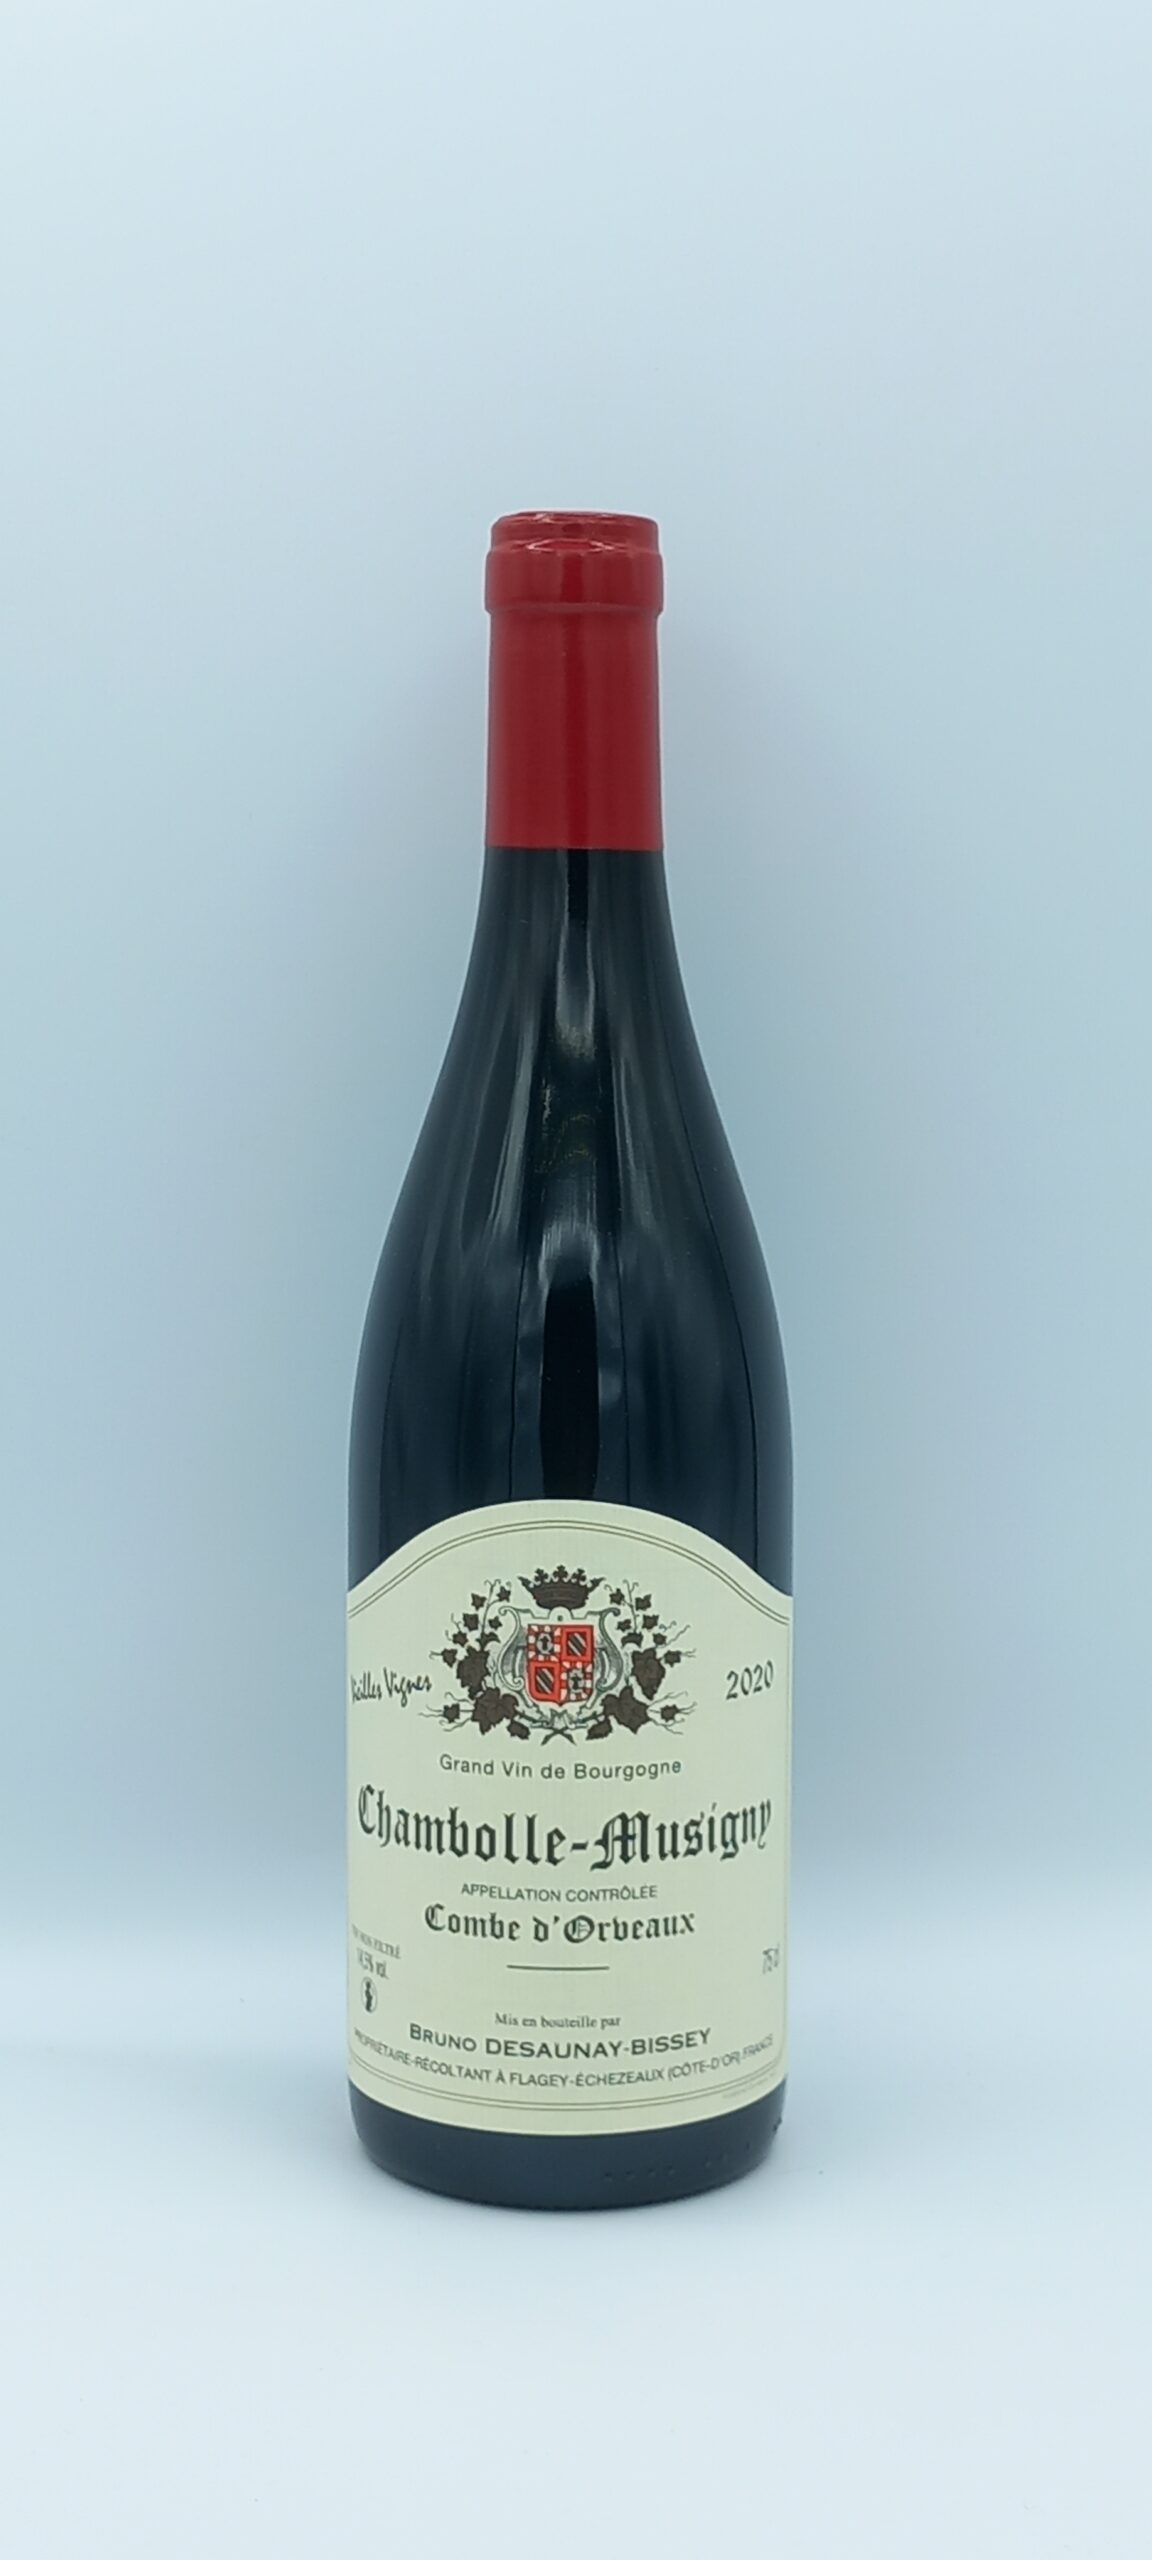 Bourgogne Chambolle-Musigny “Combe d’Orveaux” 2020 Domaine Desaunay-Bissey